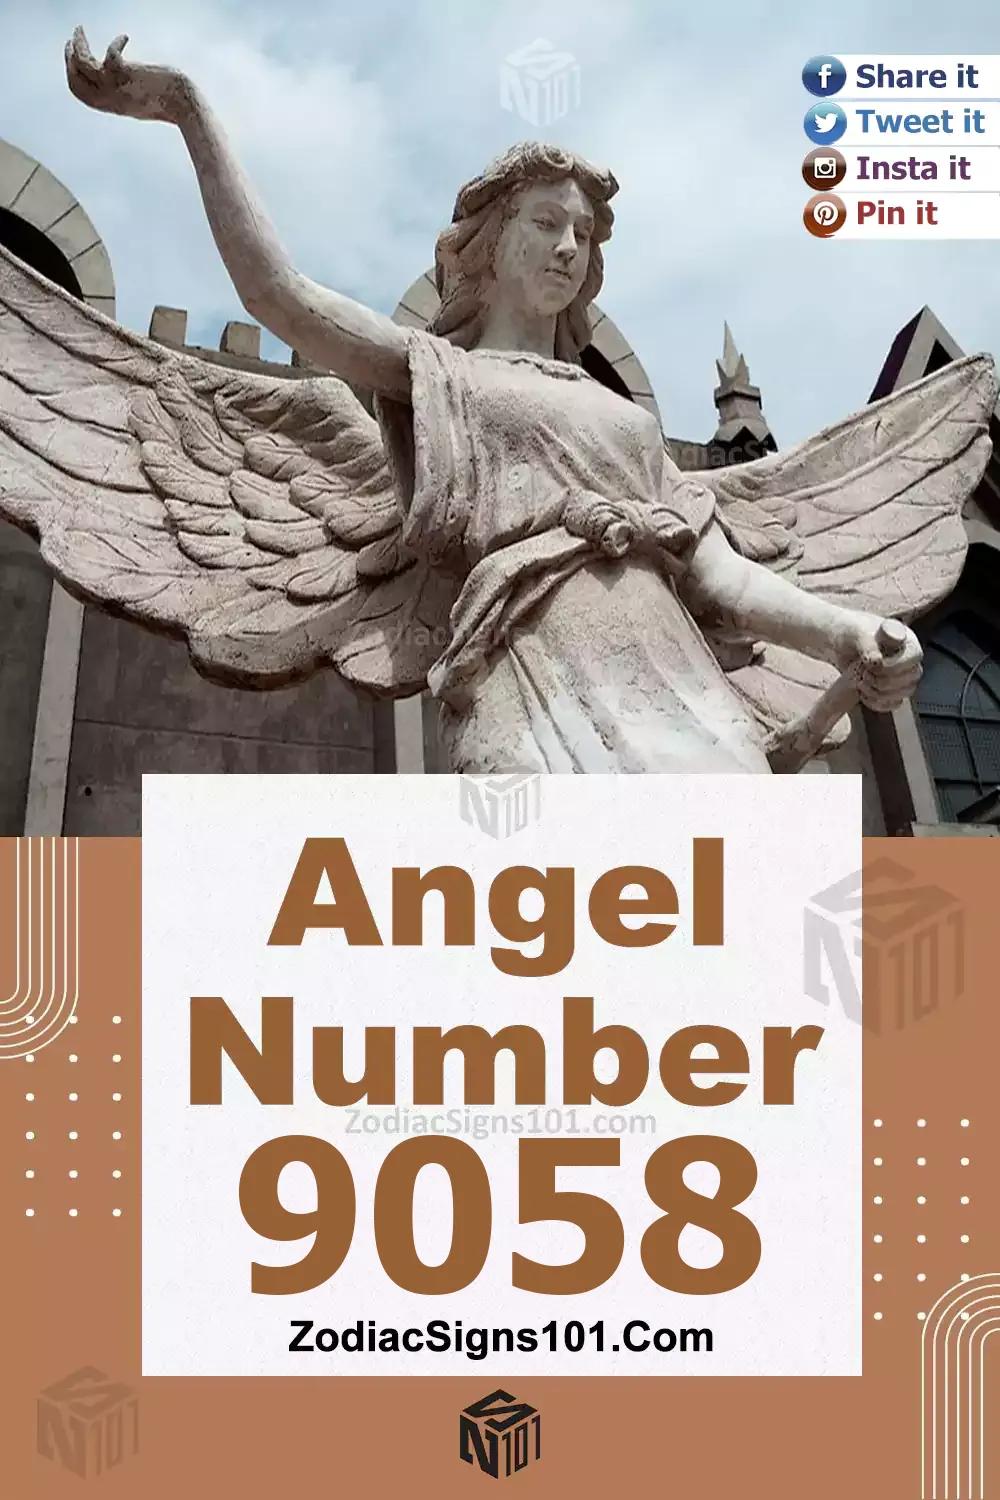 9058 Angel Number Meaning